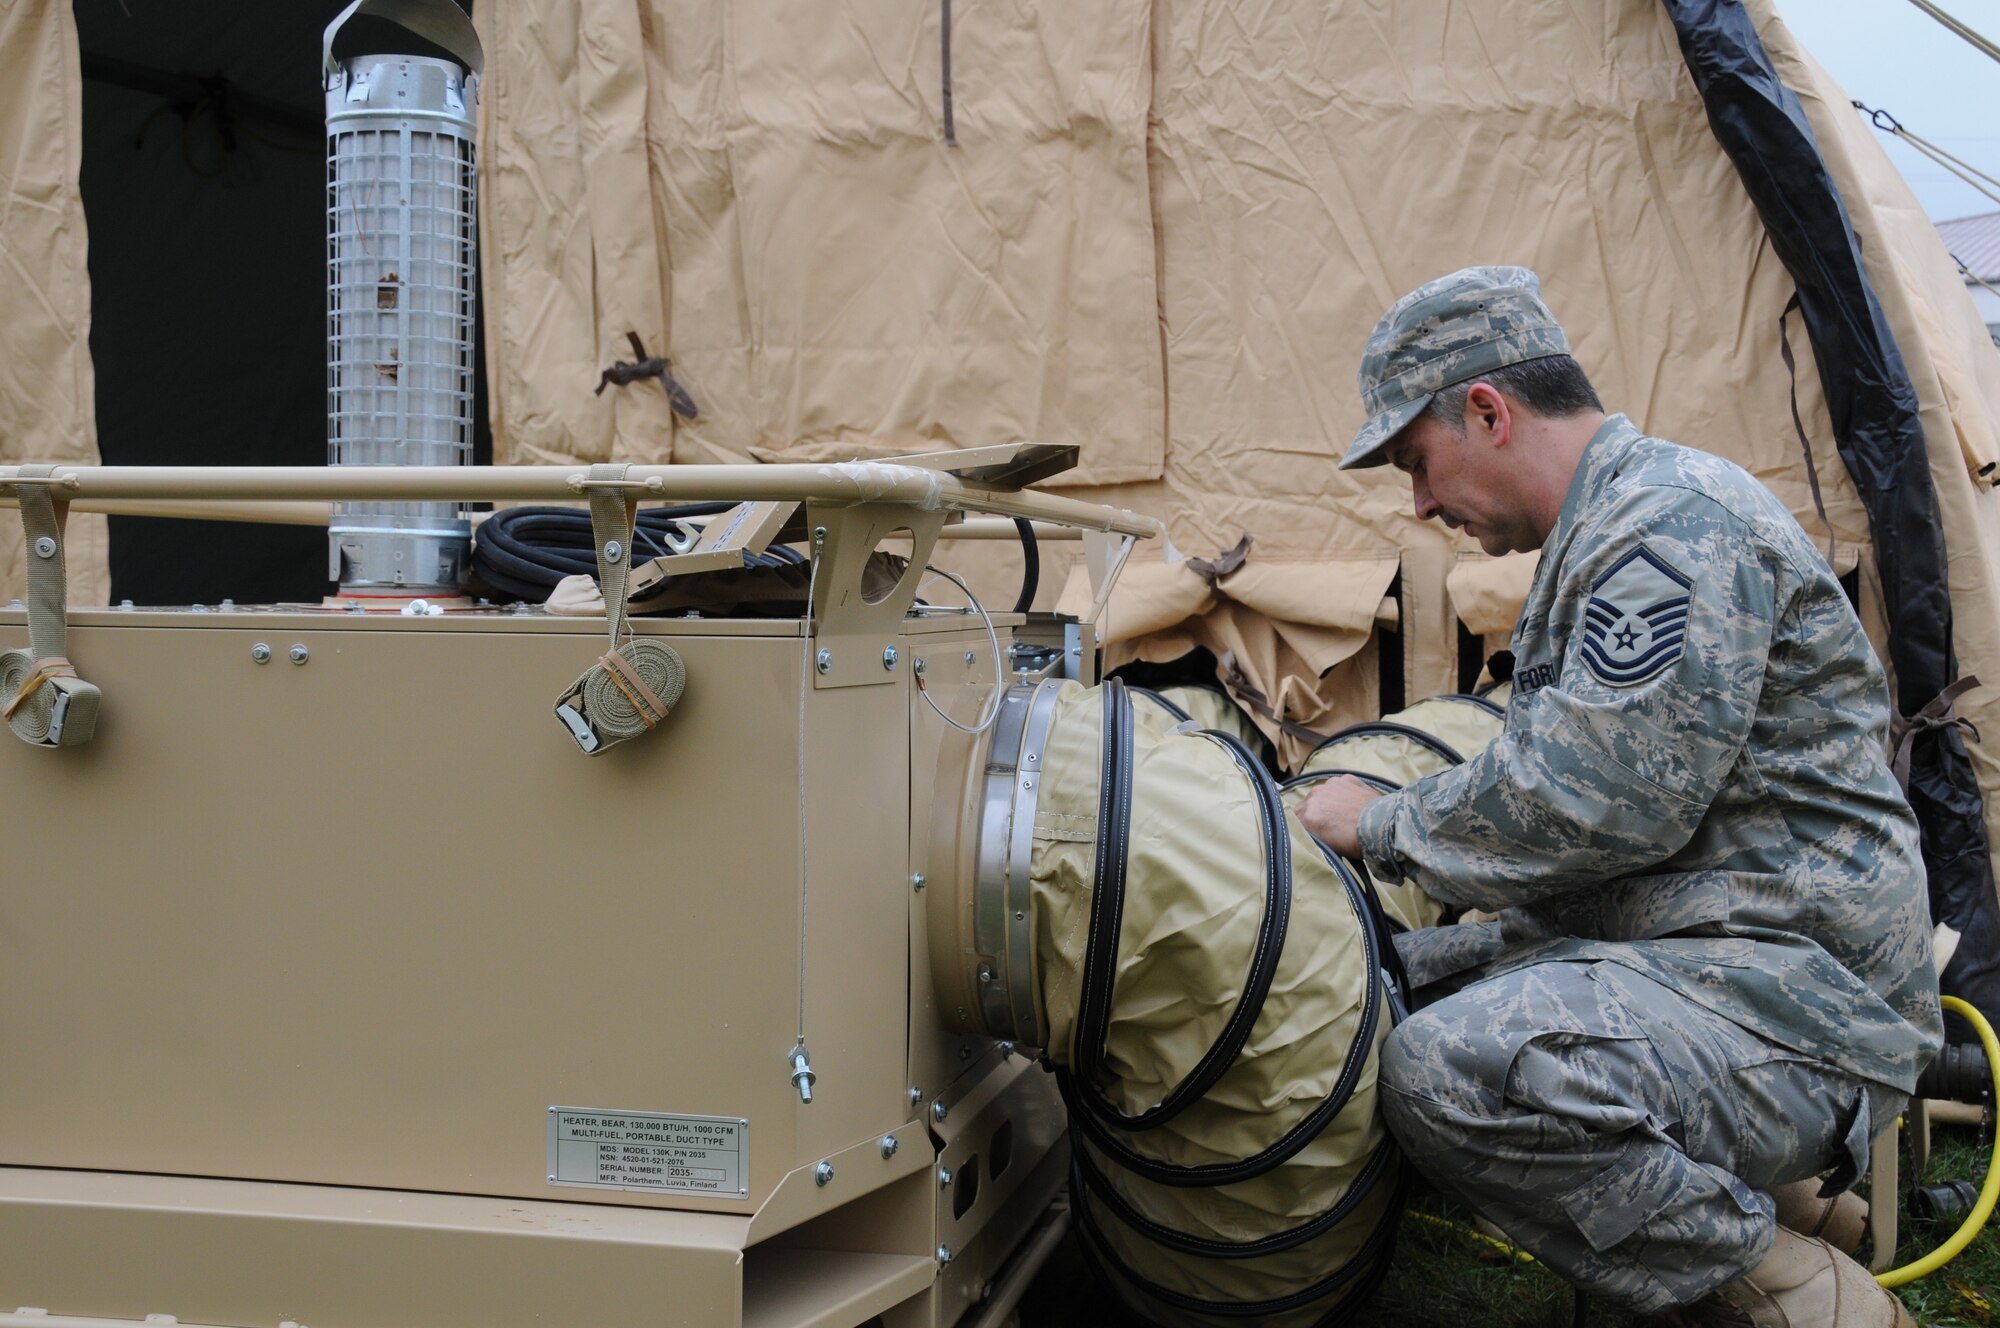 Master Sgt. Thomas Pilarz, 107th AW, Civil engineering Squadron prepares a self contained mobile heater for use. The heating system is complete with duct work, thermostat and a carbon monoxide detector.   The heaters are part of a new system that is being set up to provide temporary housing for Vigilant Guard military responders. (USAF Photo/SSgt. Peter Dean)